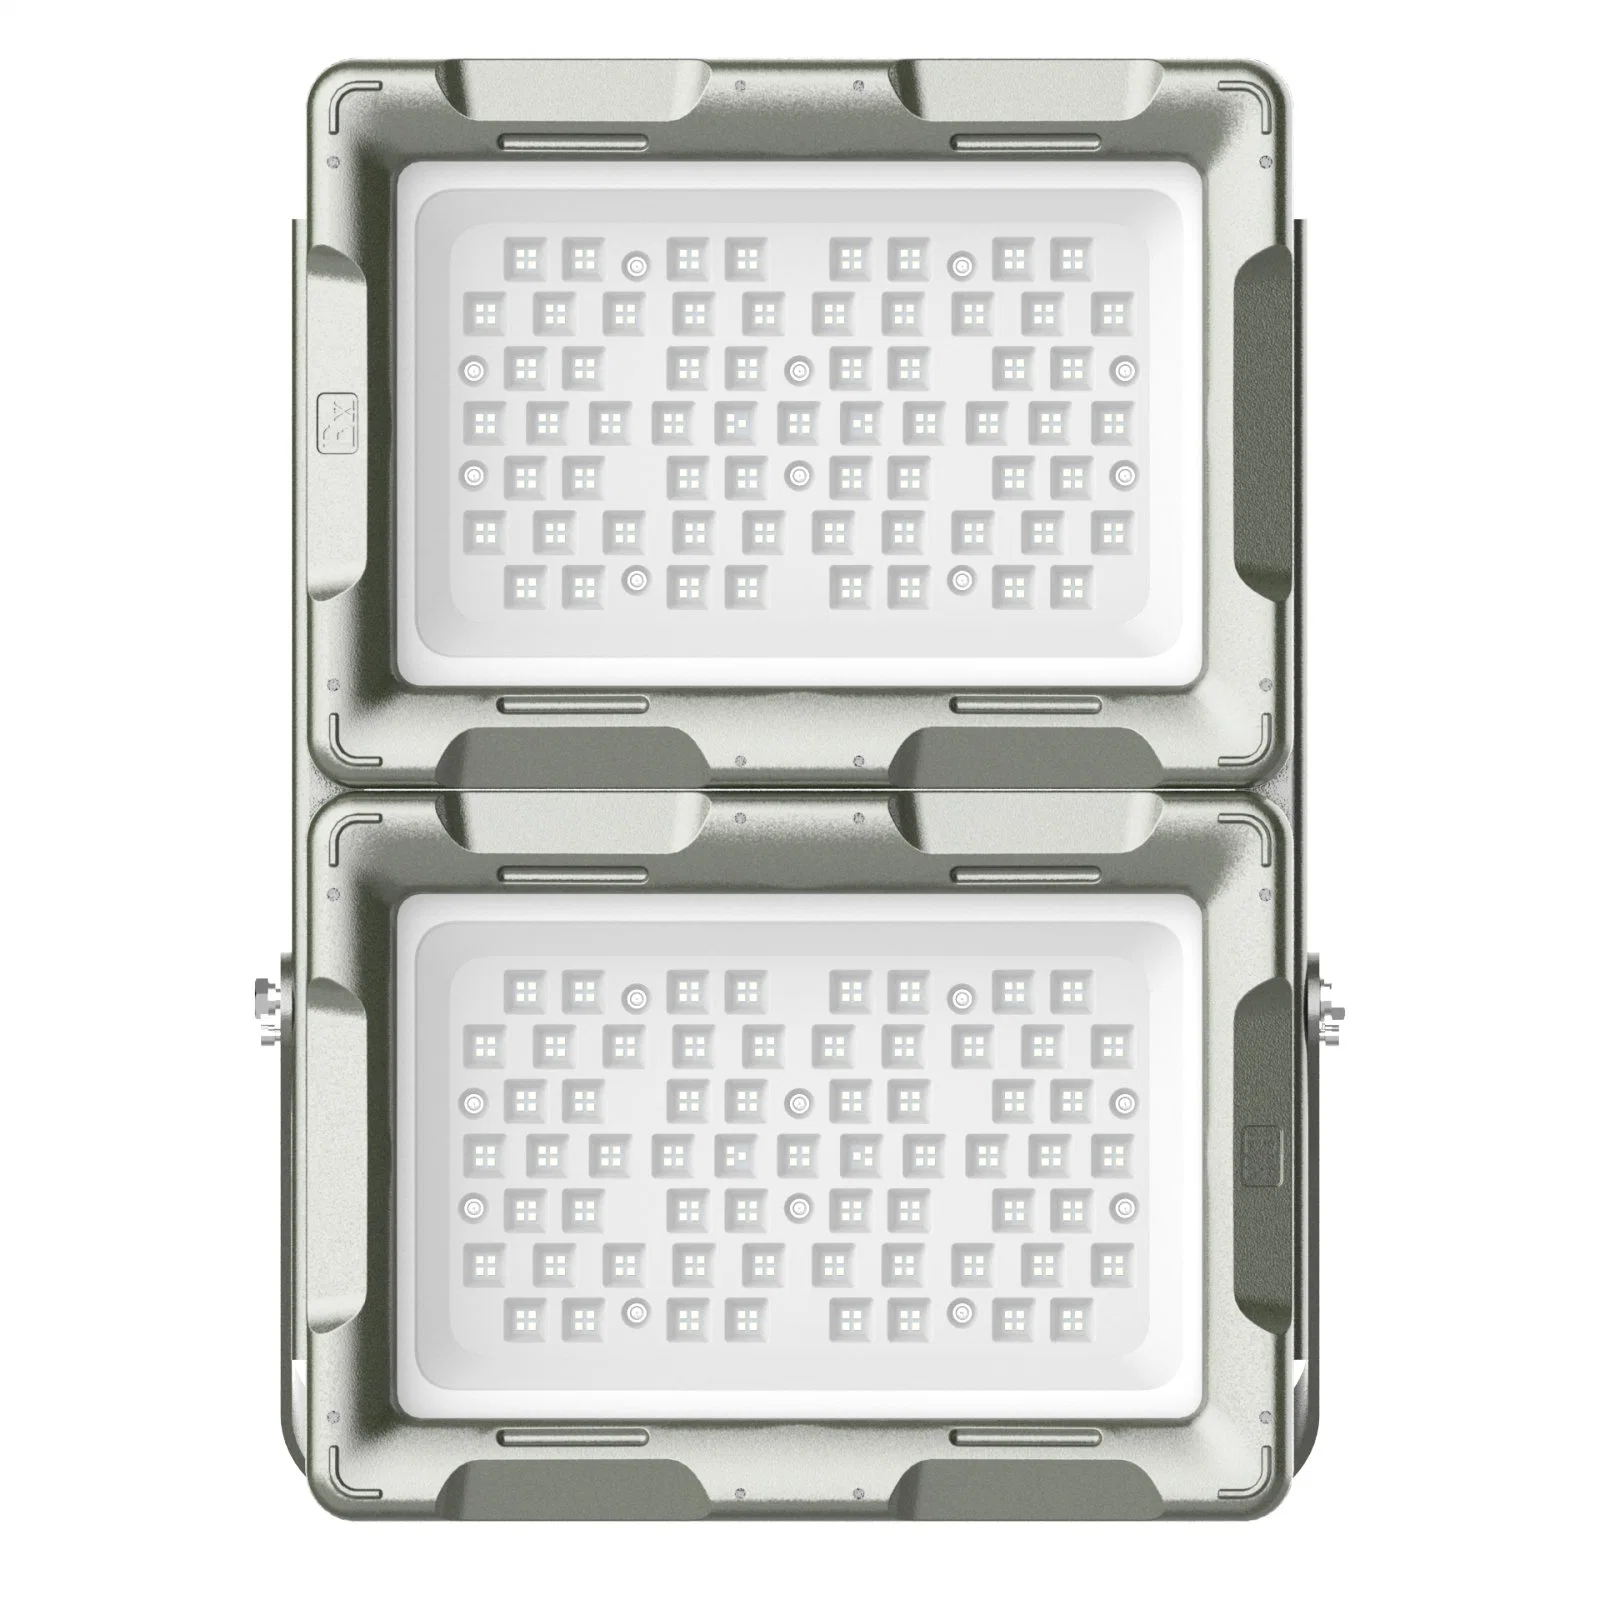 Professional LED Explosion-Proof Flood Lamps for Hazardous Areas Square Lighting